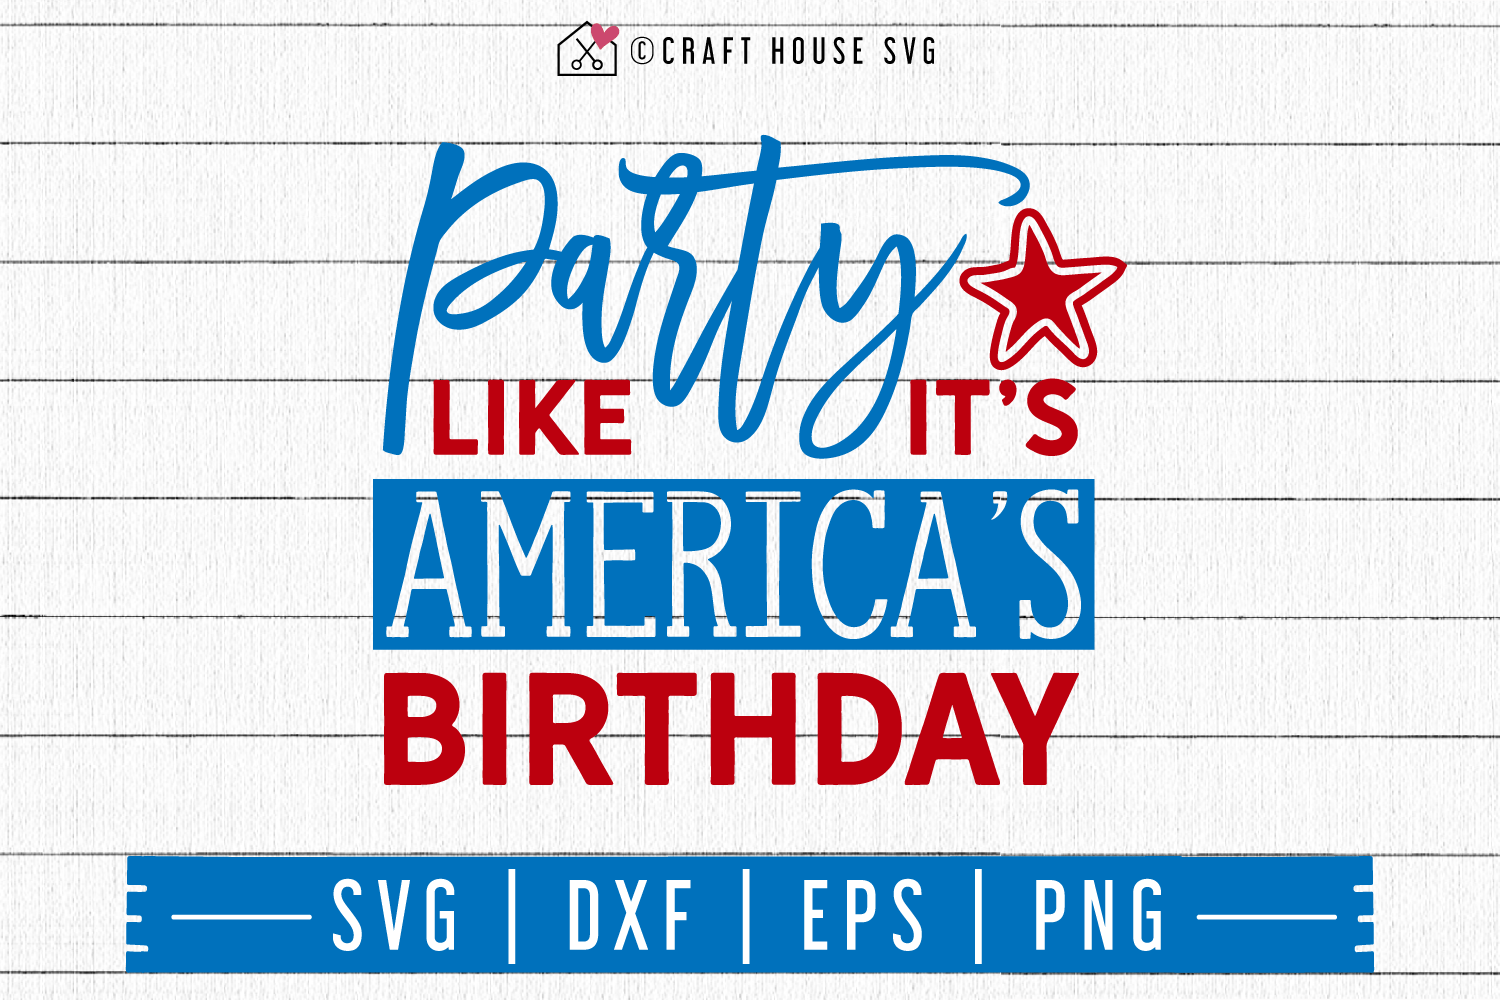 4th of July SVG file | Party like its Americas birthday SVG Craft House SVG - SVG files for Cricut and Silhouette